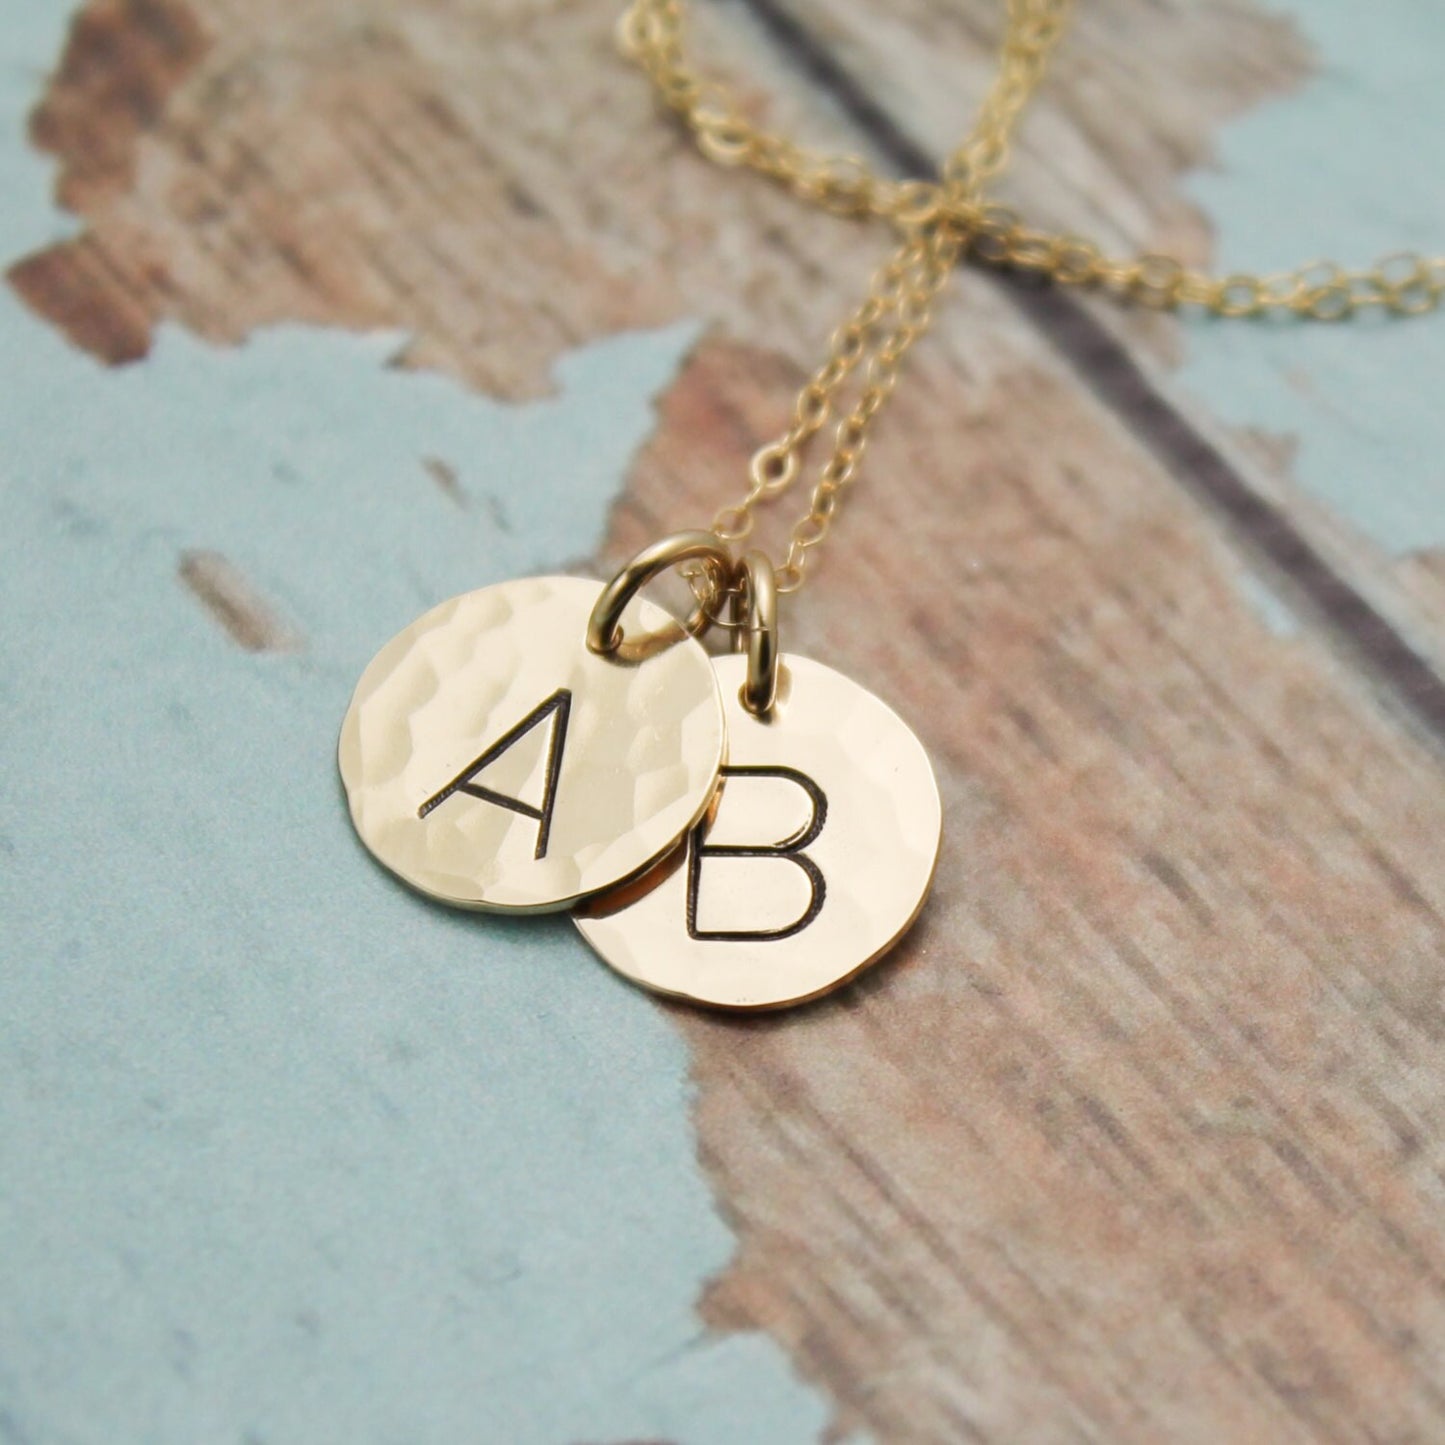 Two (2) 14K Gold Filled Initial Necklace Personalized Hand Stamped Jewelry